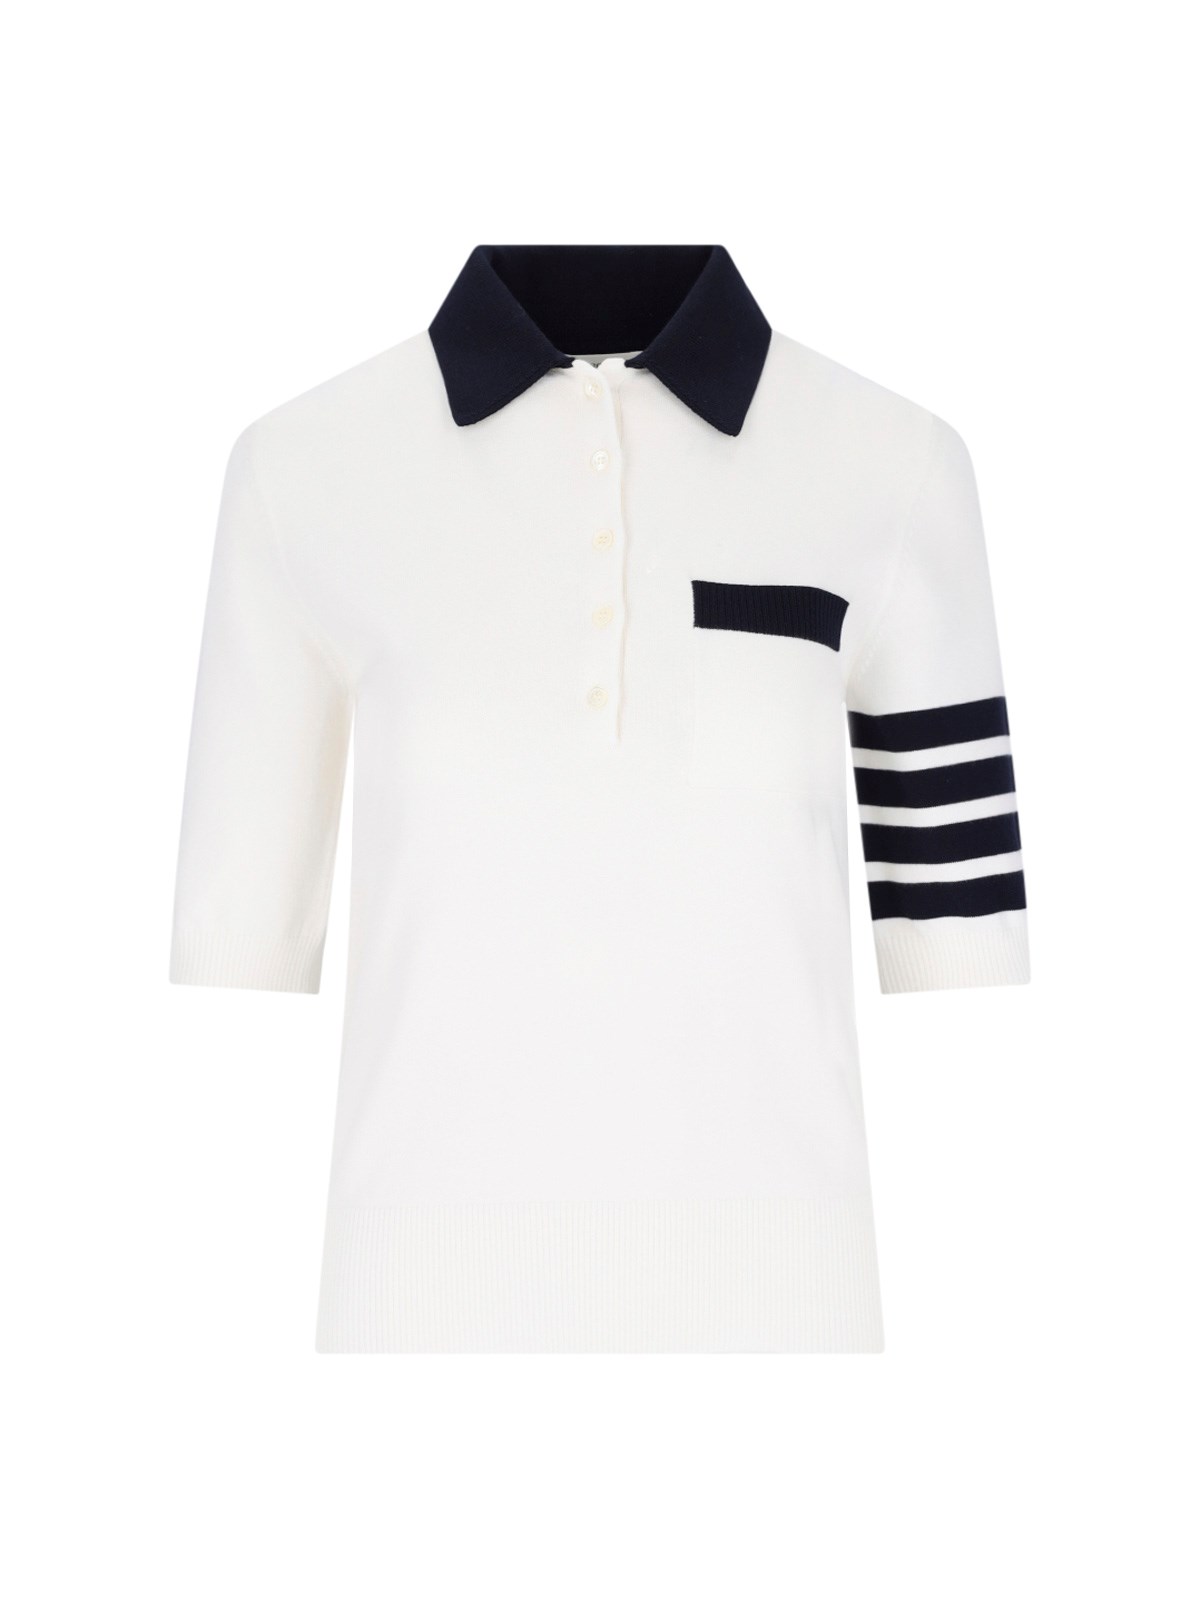 THOM BROWNE "HECTOR" KNIT POLO SHIRT